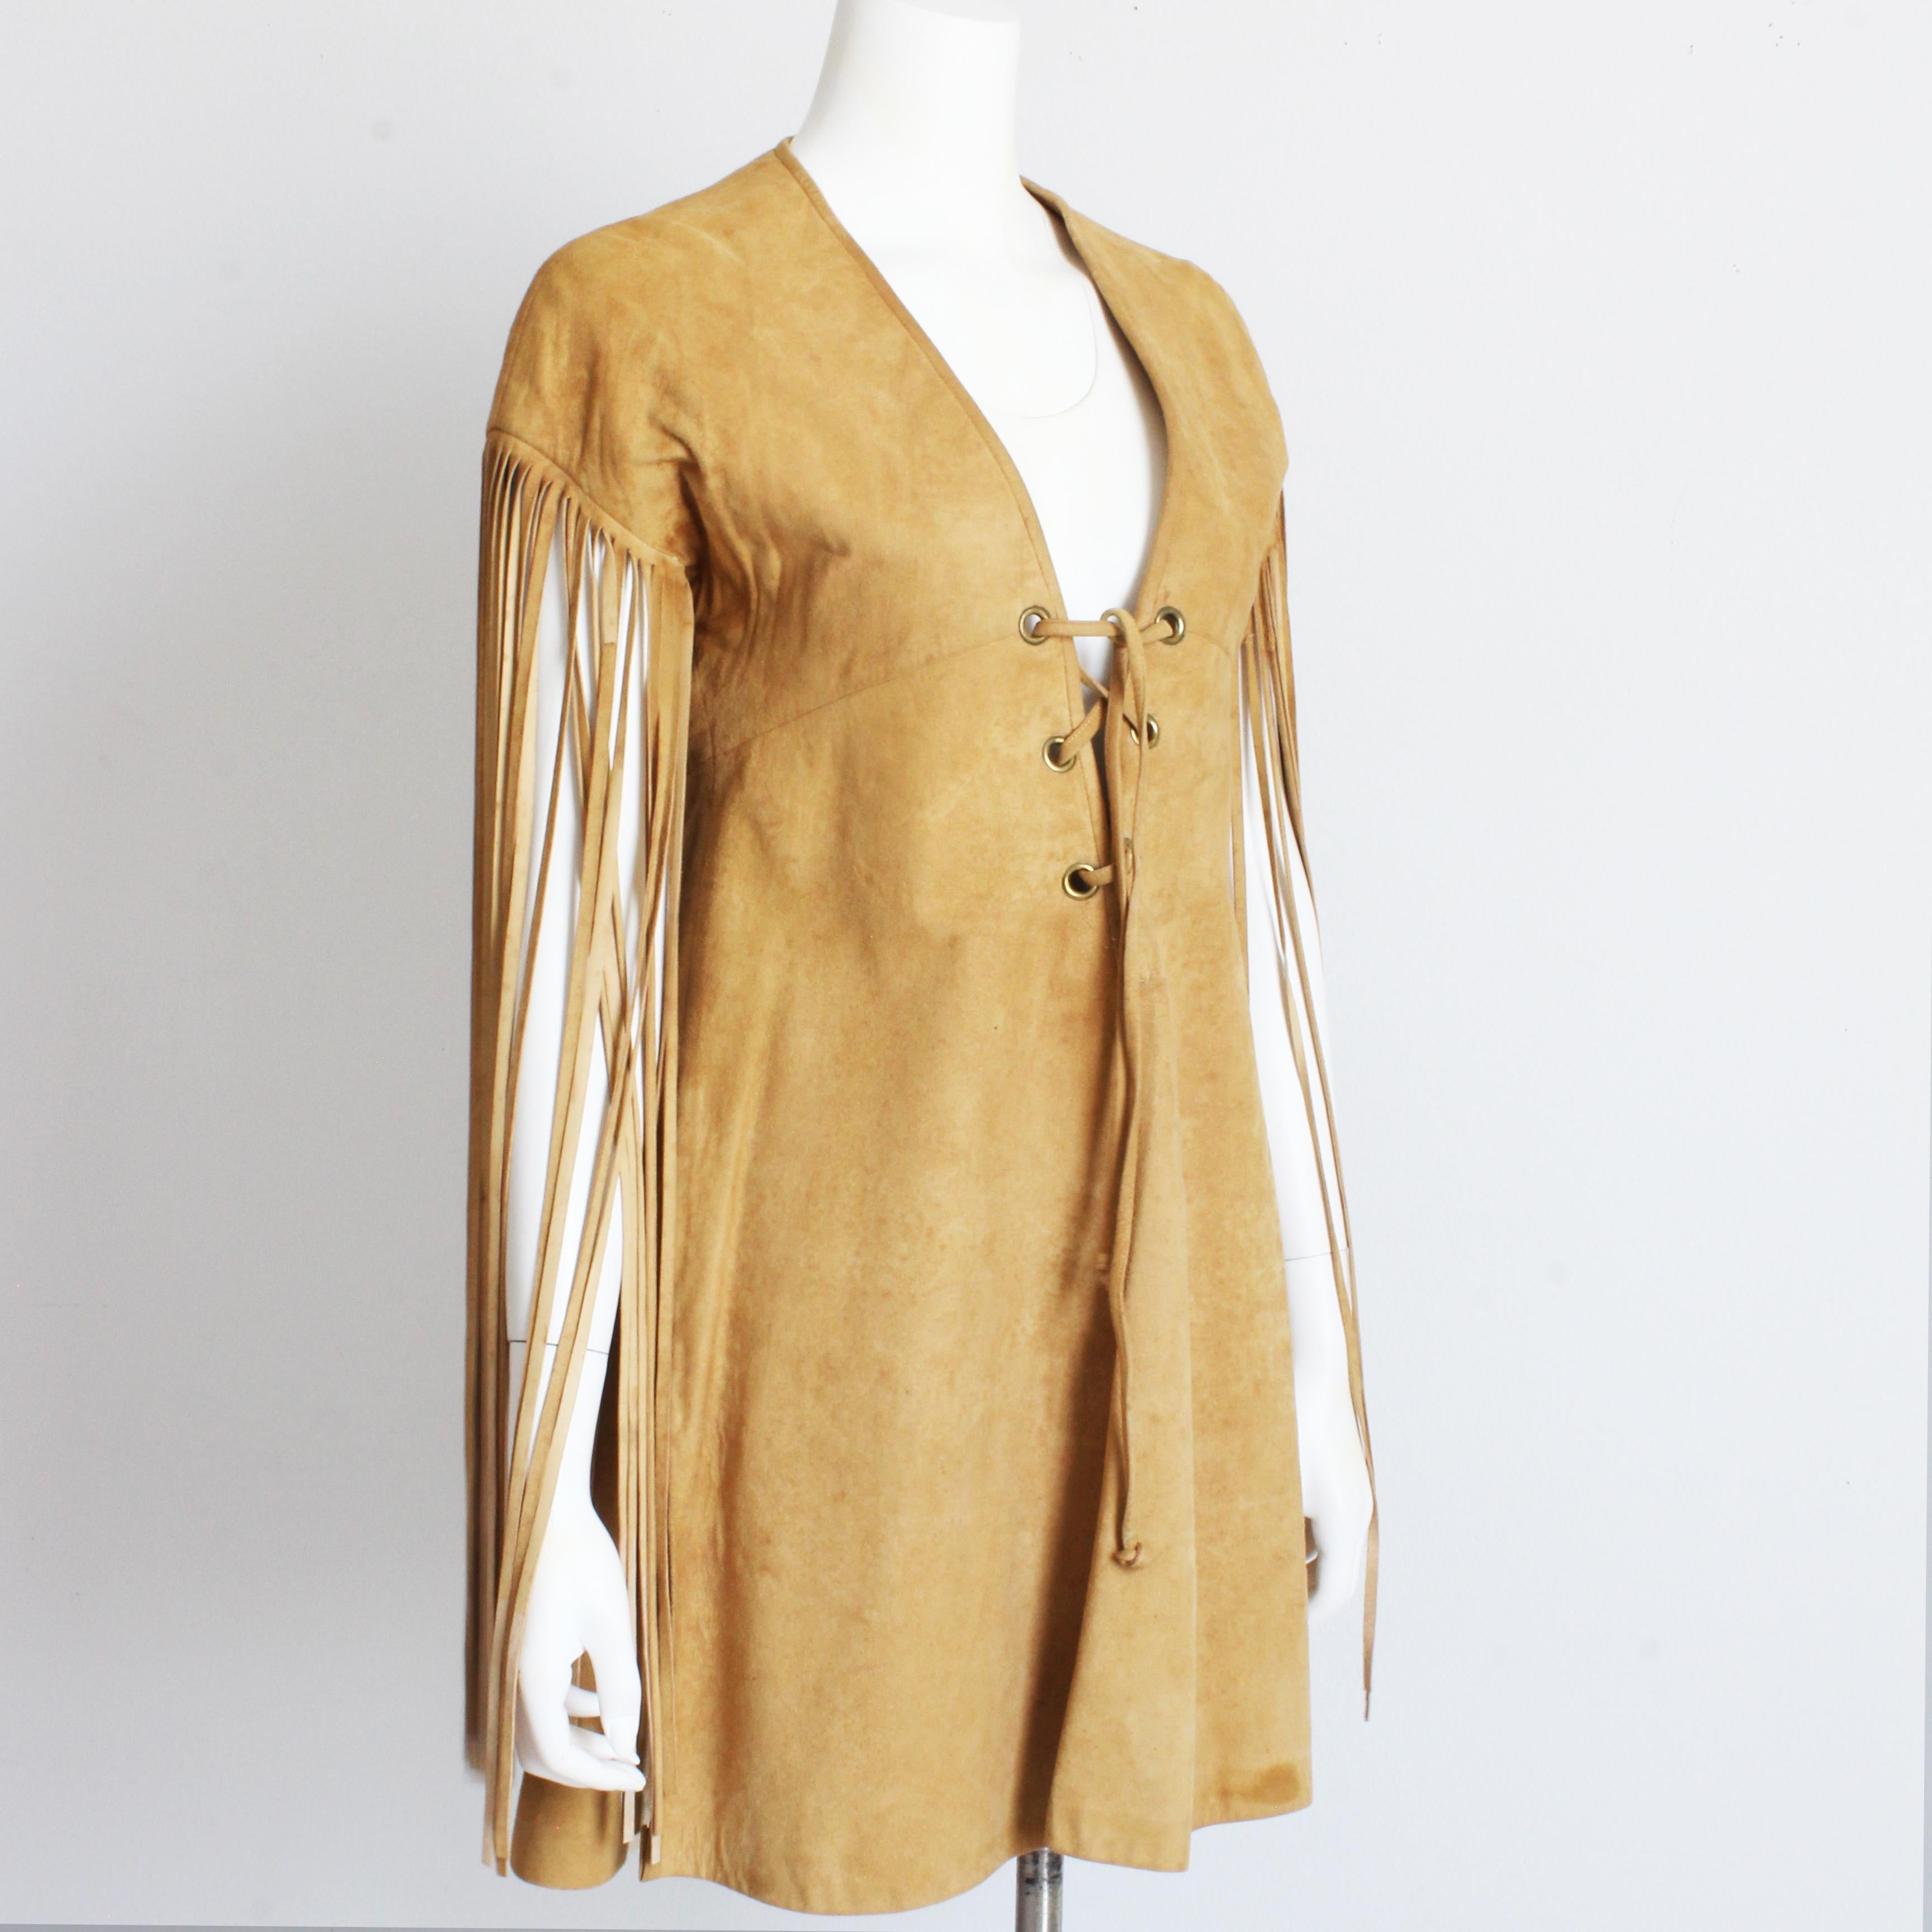 Fabulous Bonnie Cashin for Sills chamois leather tunic dress with fringe, likely made in the early 60s.  A unicorn!

A similar design can be seen in Bonnie Cashin's fashion sketch called 